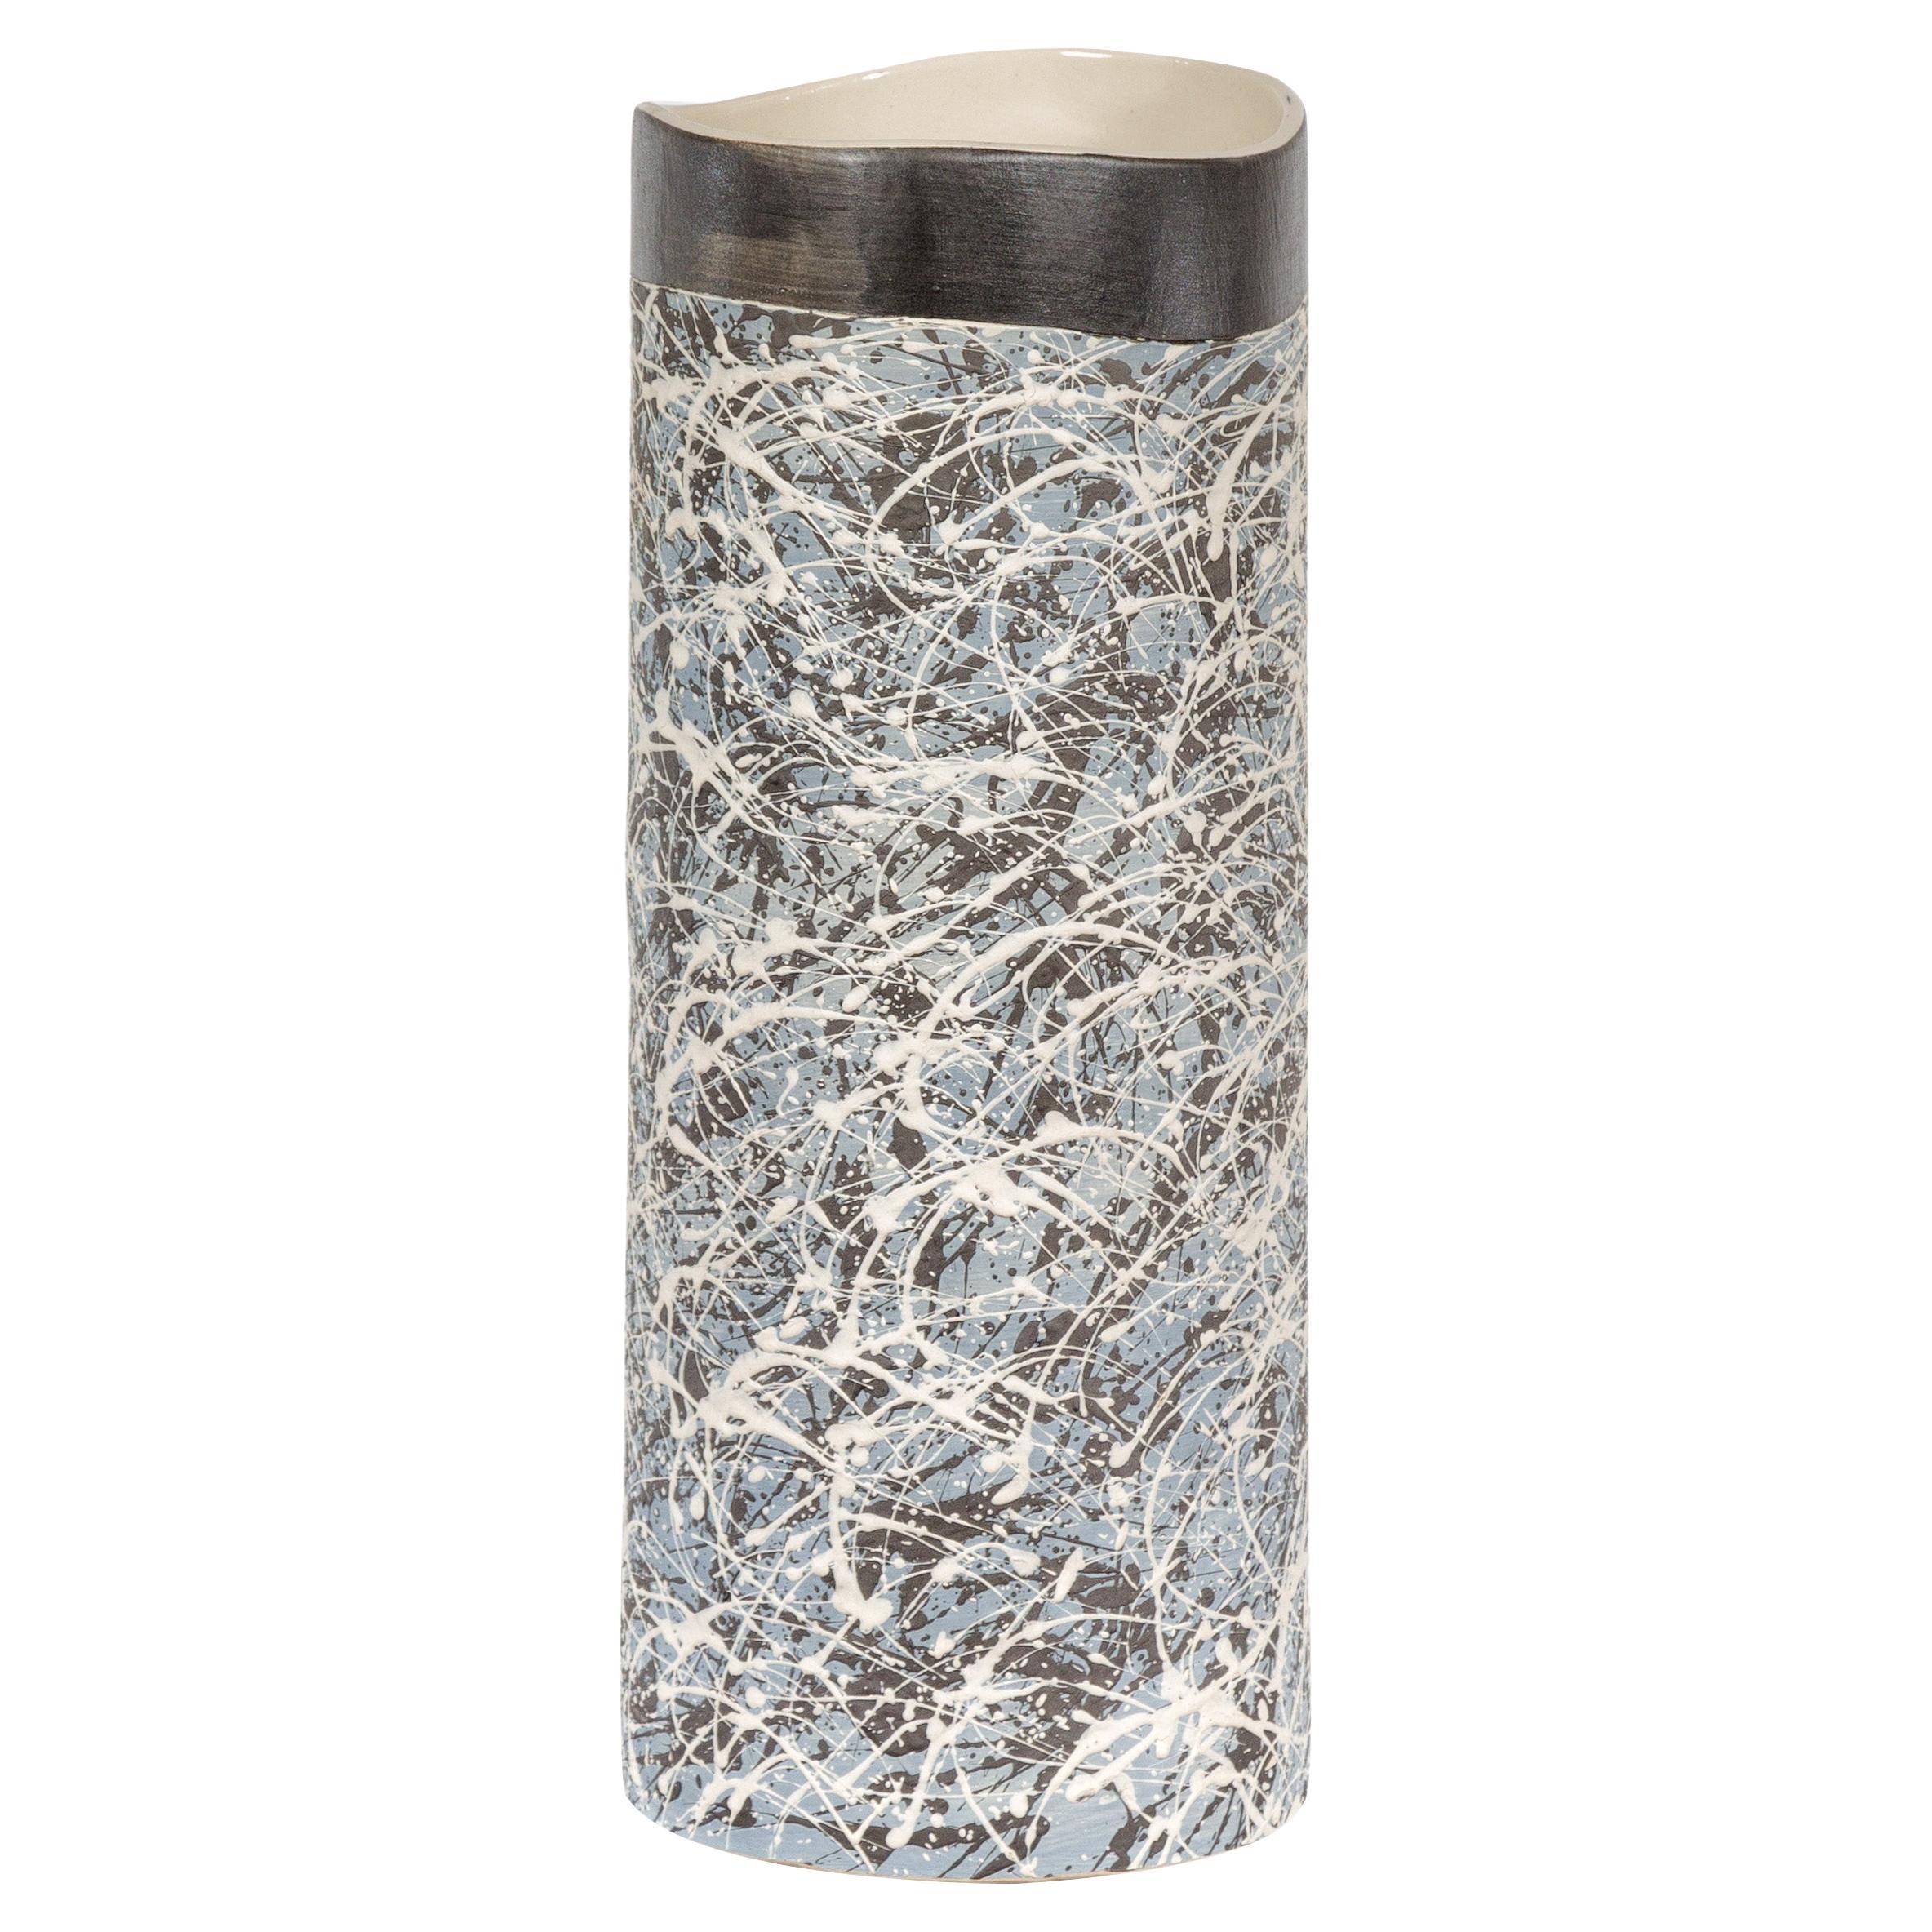 Textured Blue Gray, White, Brown and Black Spattered Ceramic Vase For Sale